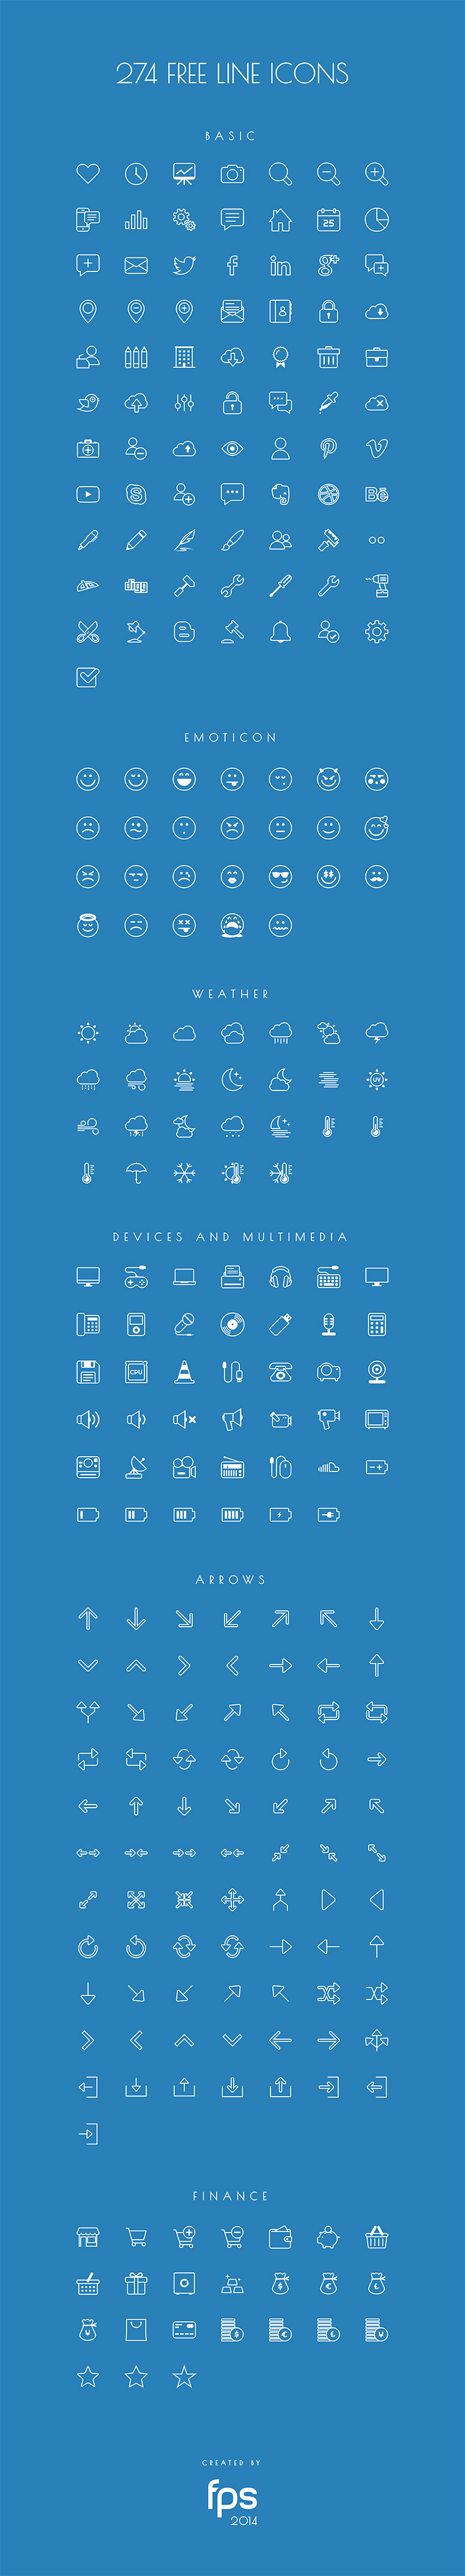 274 Vector Line Icons by fps web agency